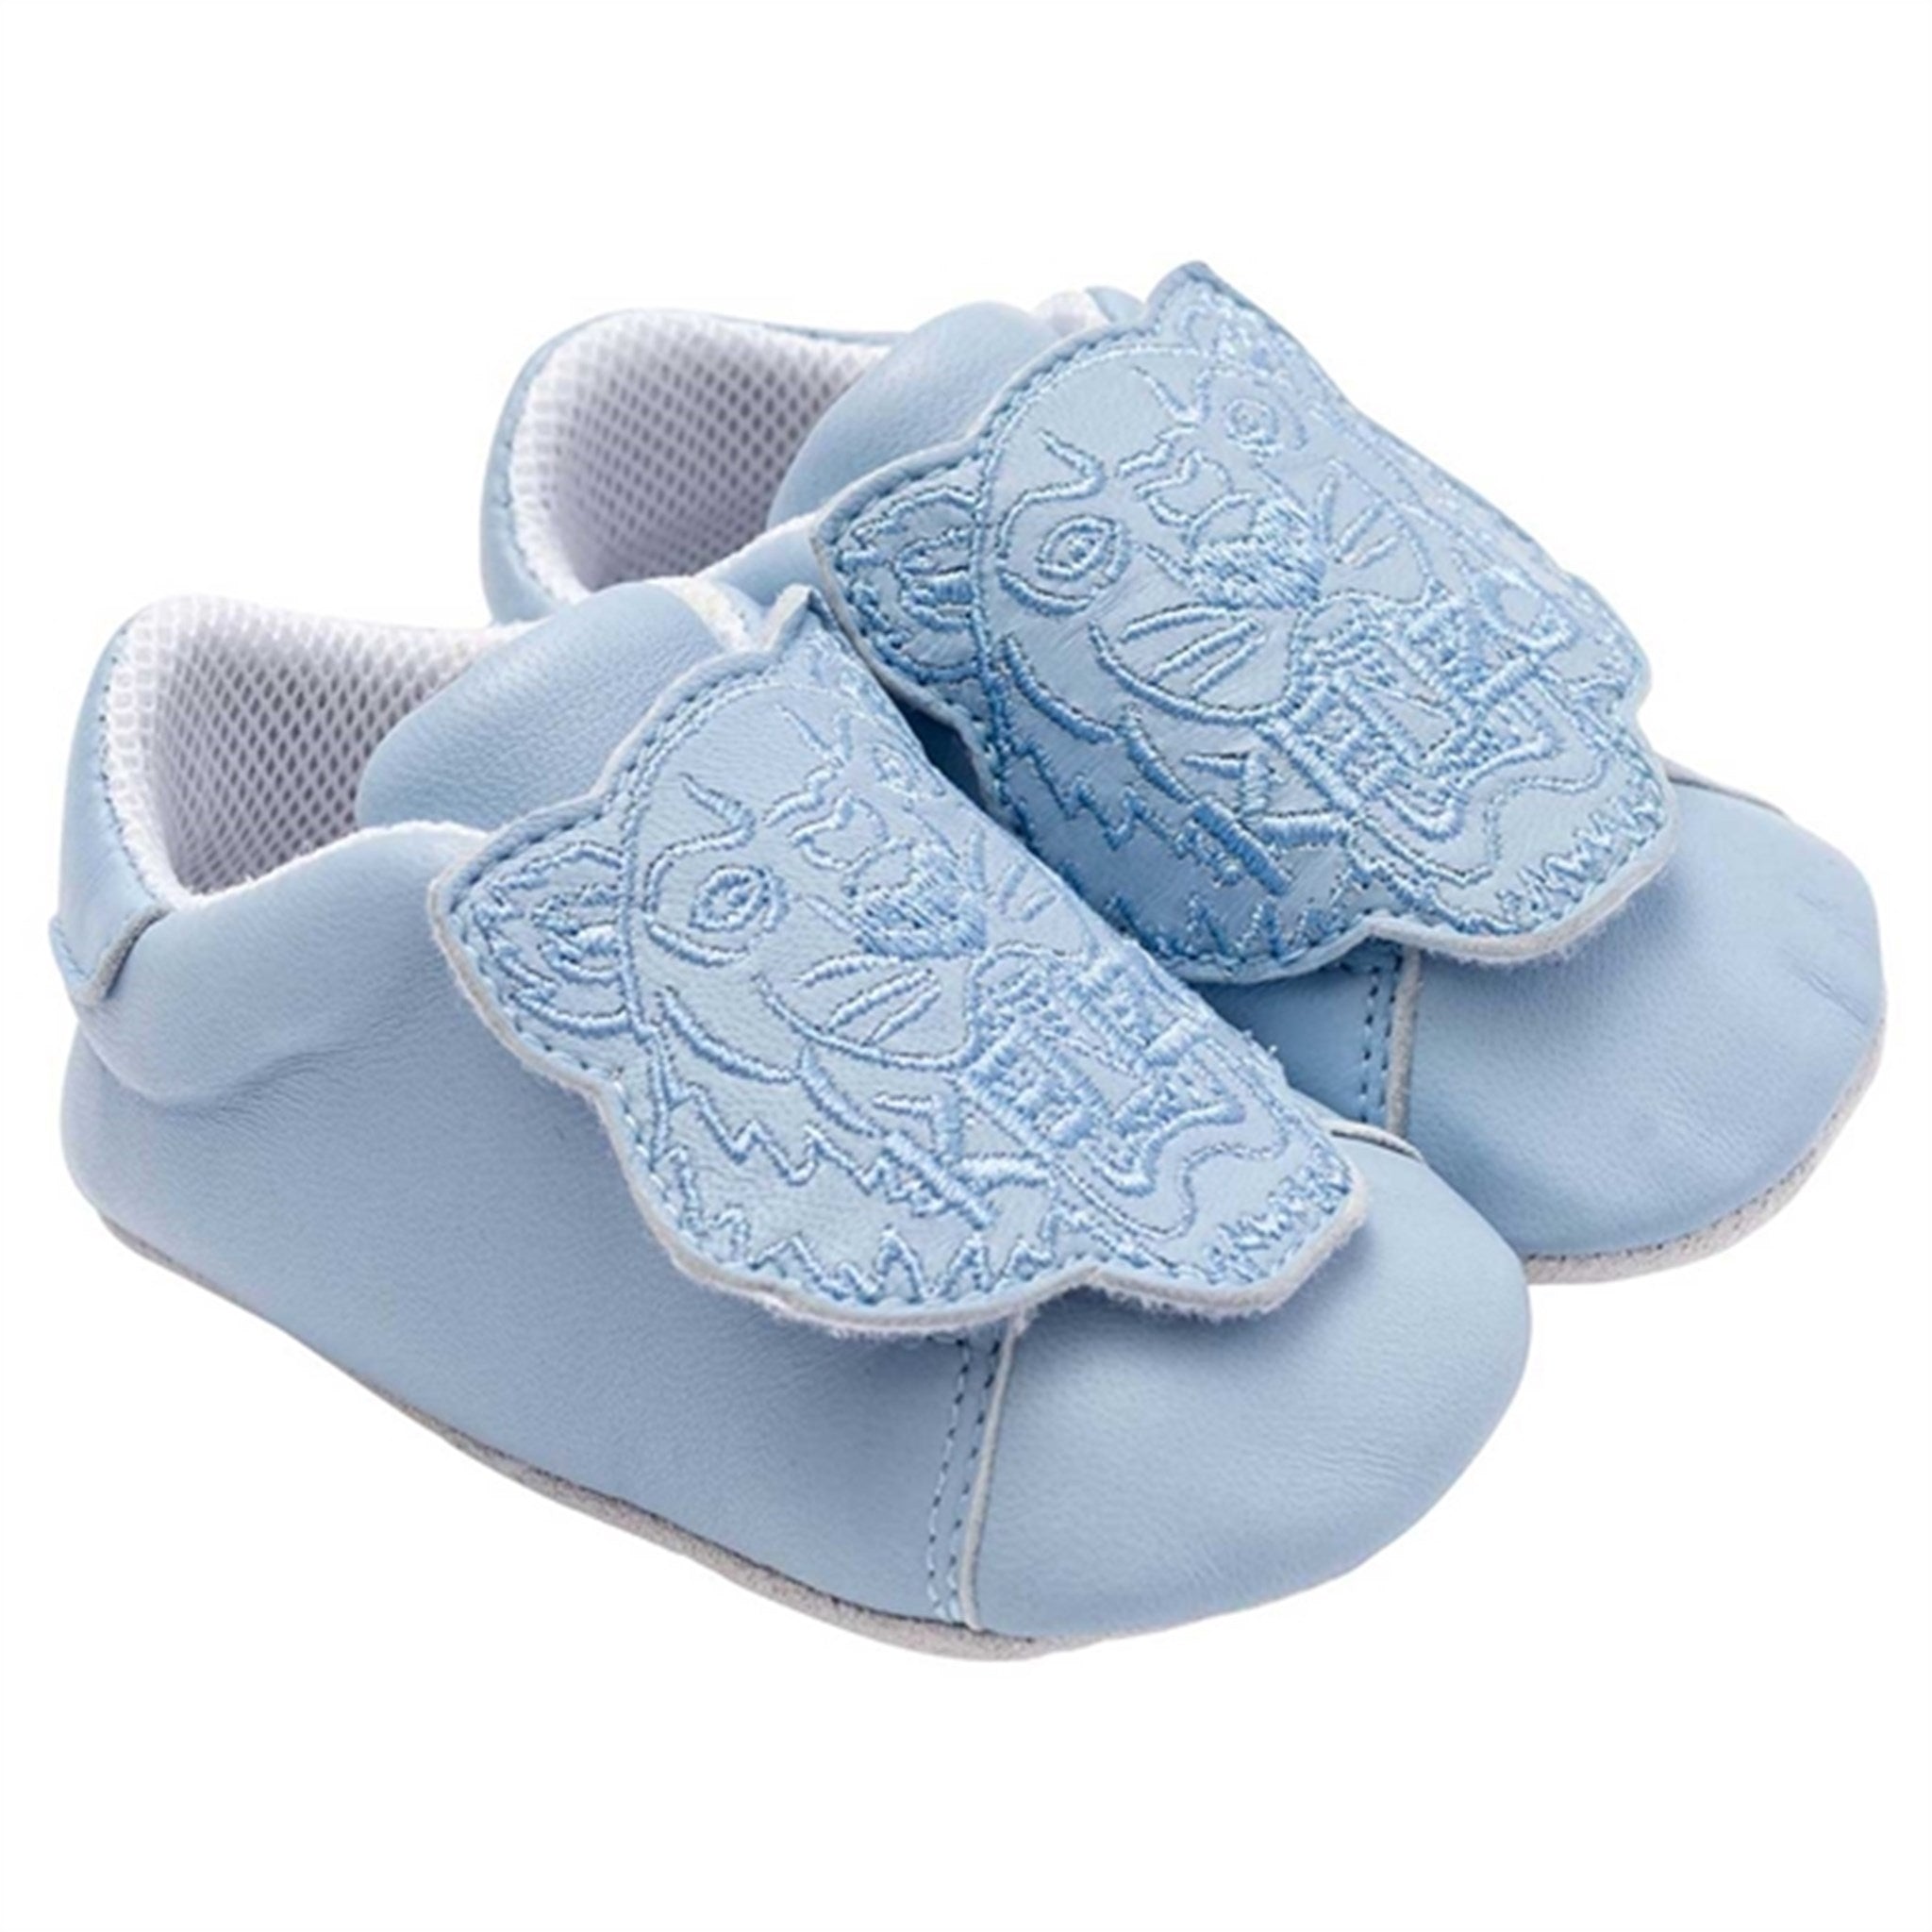 Kenzo Tiger Slippers Pale Blue